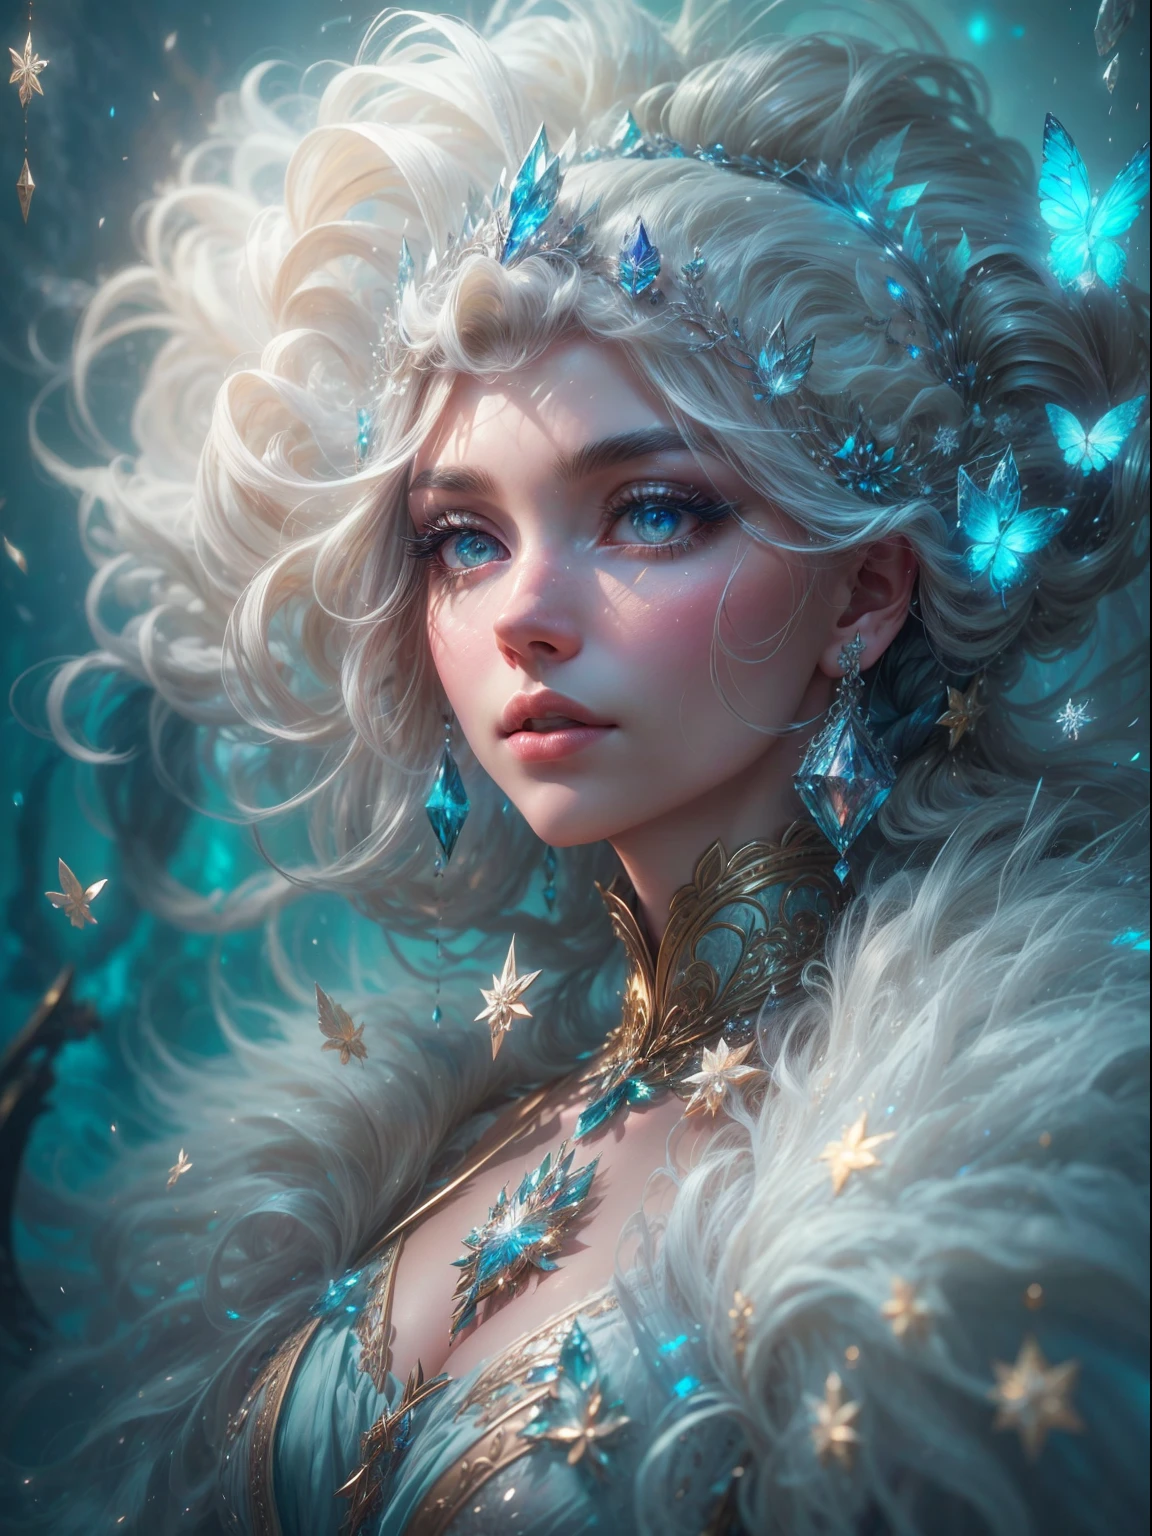 Generate a pretty and realistic fantasy artwork with bold jewel-toned hues, pretty glitter and shimmer, and lots of snowflakes. Generate a luminous and  woman with curly hair, metallic hair, and realistically textured hair. Her skin is pure white and seems to glow in the light. The woman's face is important: include ((soft, puffy, big lips, elegant features, and the most beautiful detailed macro eyes)) in the world. The woman is in a winter landscape with soft falling snow and snowflakes, soft white fur, subtle iridescent details, subtle phantasmal iridescent details, and intricate and delicate jewelry that glimmers in the light. Include many small fantasy details like gossamer silk, feathers, delicate and stunning embroidery, and luminous lighting that glimmers. The woman's face is unobscured by details and her eyes are sharp and in high resolution. Incorporate dreamy colors, dynamic lighting, and detailed background elements to create a sense of awe and immersion. Include colorful flying magical birds and jewel-toned butterflies radiating a magical aura. Consider the latest trends in fantasy art, such as incorporating unique lighting effects, exploring dynamic and compelling composition techniques, and experimenting with unique color palettes. Take inspiration from the top artists on ArtStation and Midjourney. Camera: Choose an angle that highlights the character's beauty and enhances the magical majesty of the artwork. Lighting: Utilize atmospheric lighting techniques to create depth and mood. Resolution: Aim for a high-resolution artwork to showcase intricate details and clarity. Art Inspirations: Seek inspiration from the trending artists on ArtStation, exploring different styles, genres, and themes. white skin, pale skin, really pale skin, really white skin, beautiful eyes, fantasy details, shimmer, glimmer, magical birds, magical butterflies, ornate, (((masterpiece))), add_detail:1, earth \(planet\),